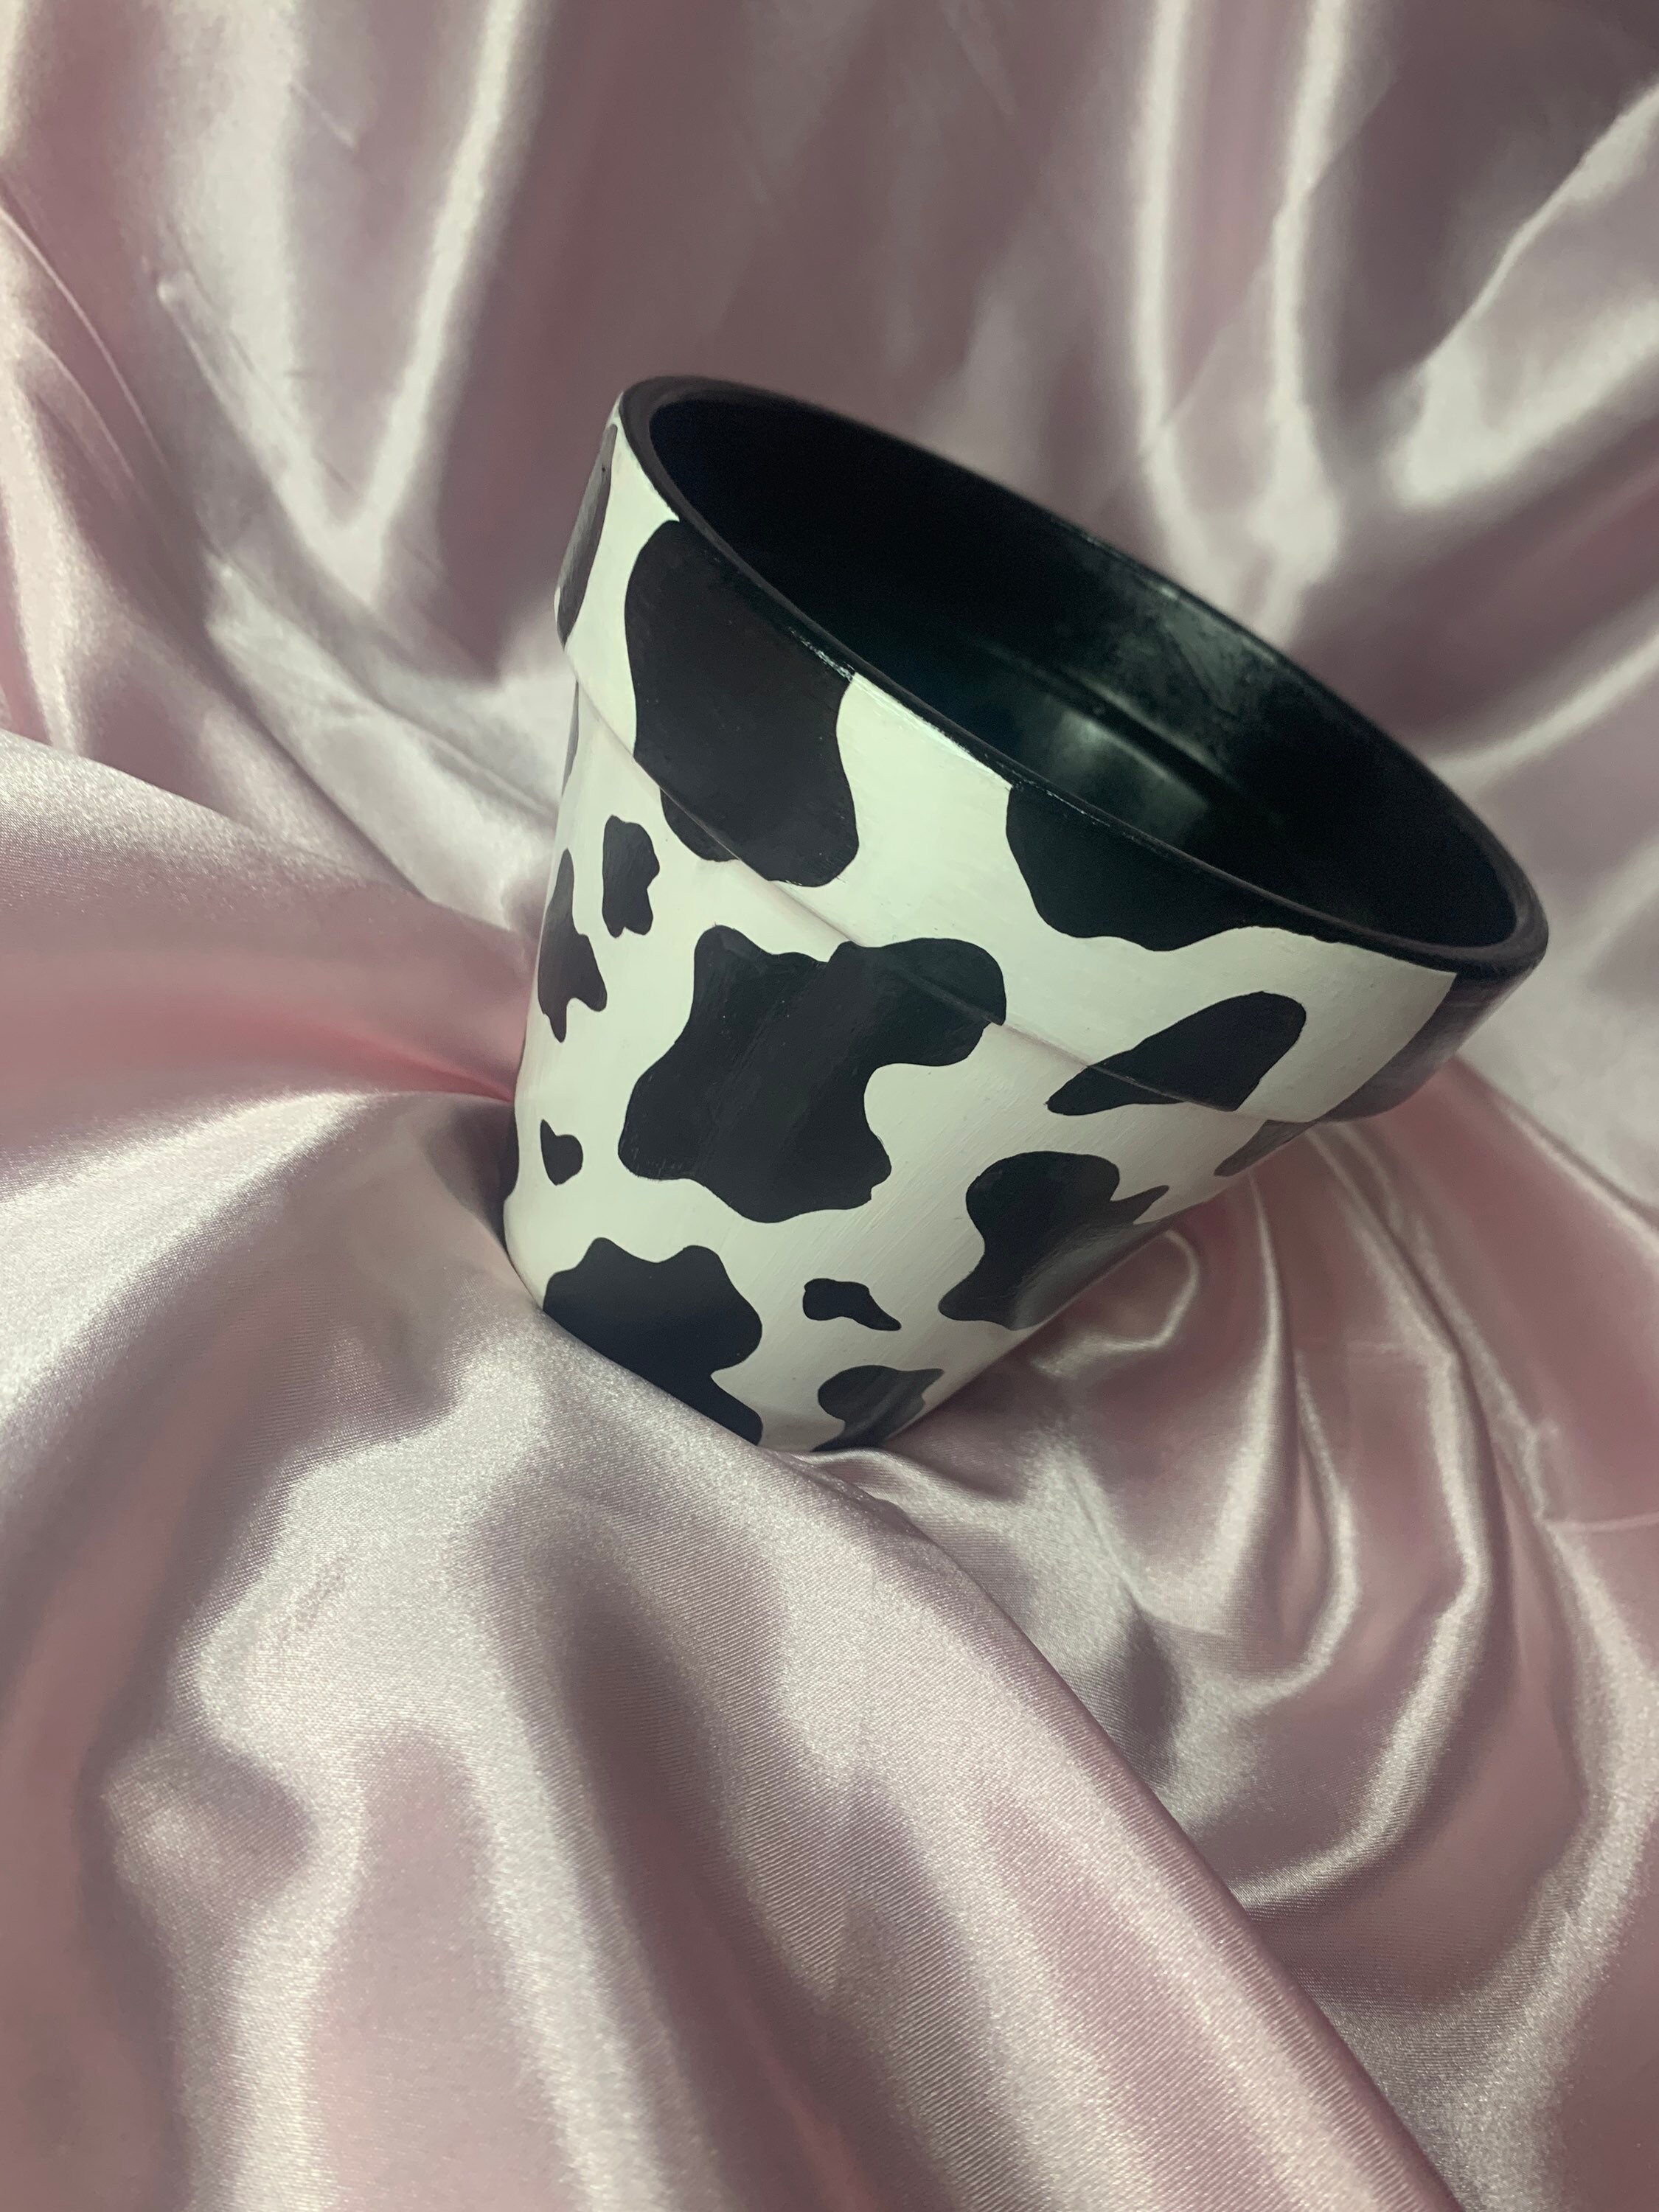 Handmade Painted Acrylic on Terracotta Indoor Home Wear Decorative Flower Pot Planter in Baby Pink & Gold Cow Print y2k Plant Pot